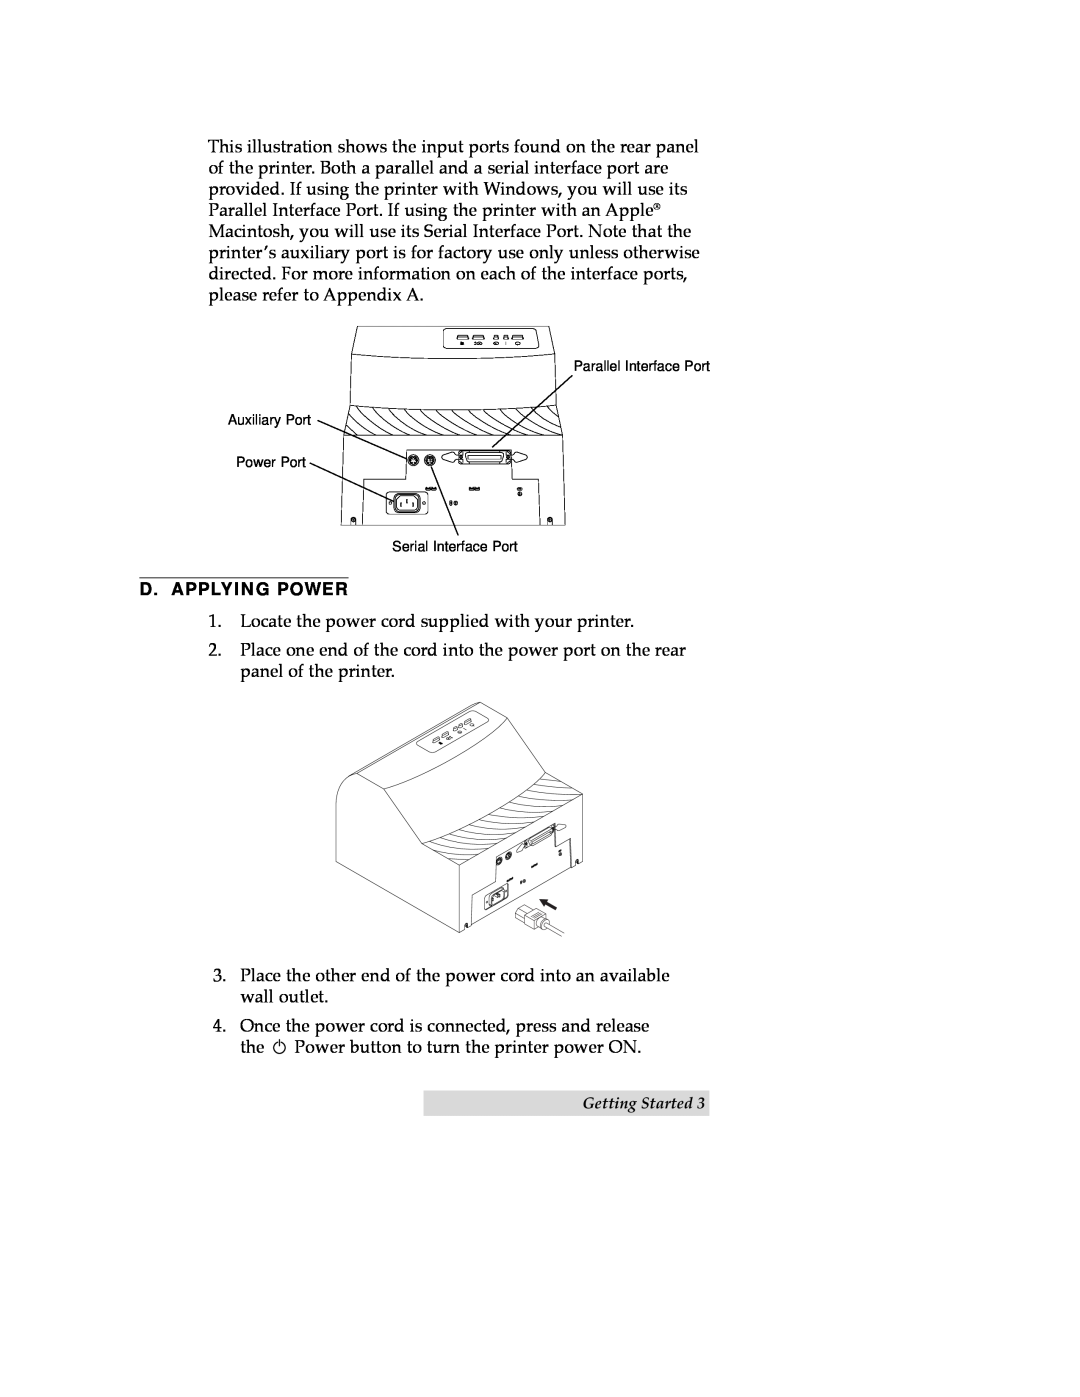 FARGO electronic CD Color Printer manual D.Applying Power, Parallel Interface Port Auxiliary Port Power Port 